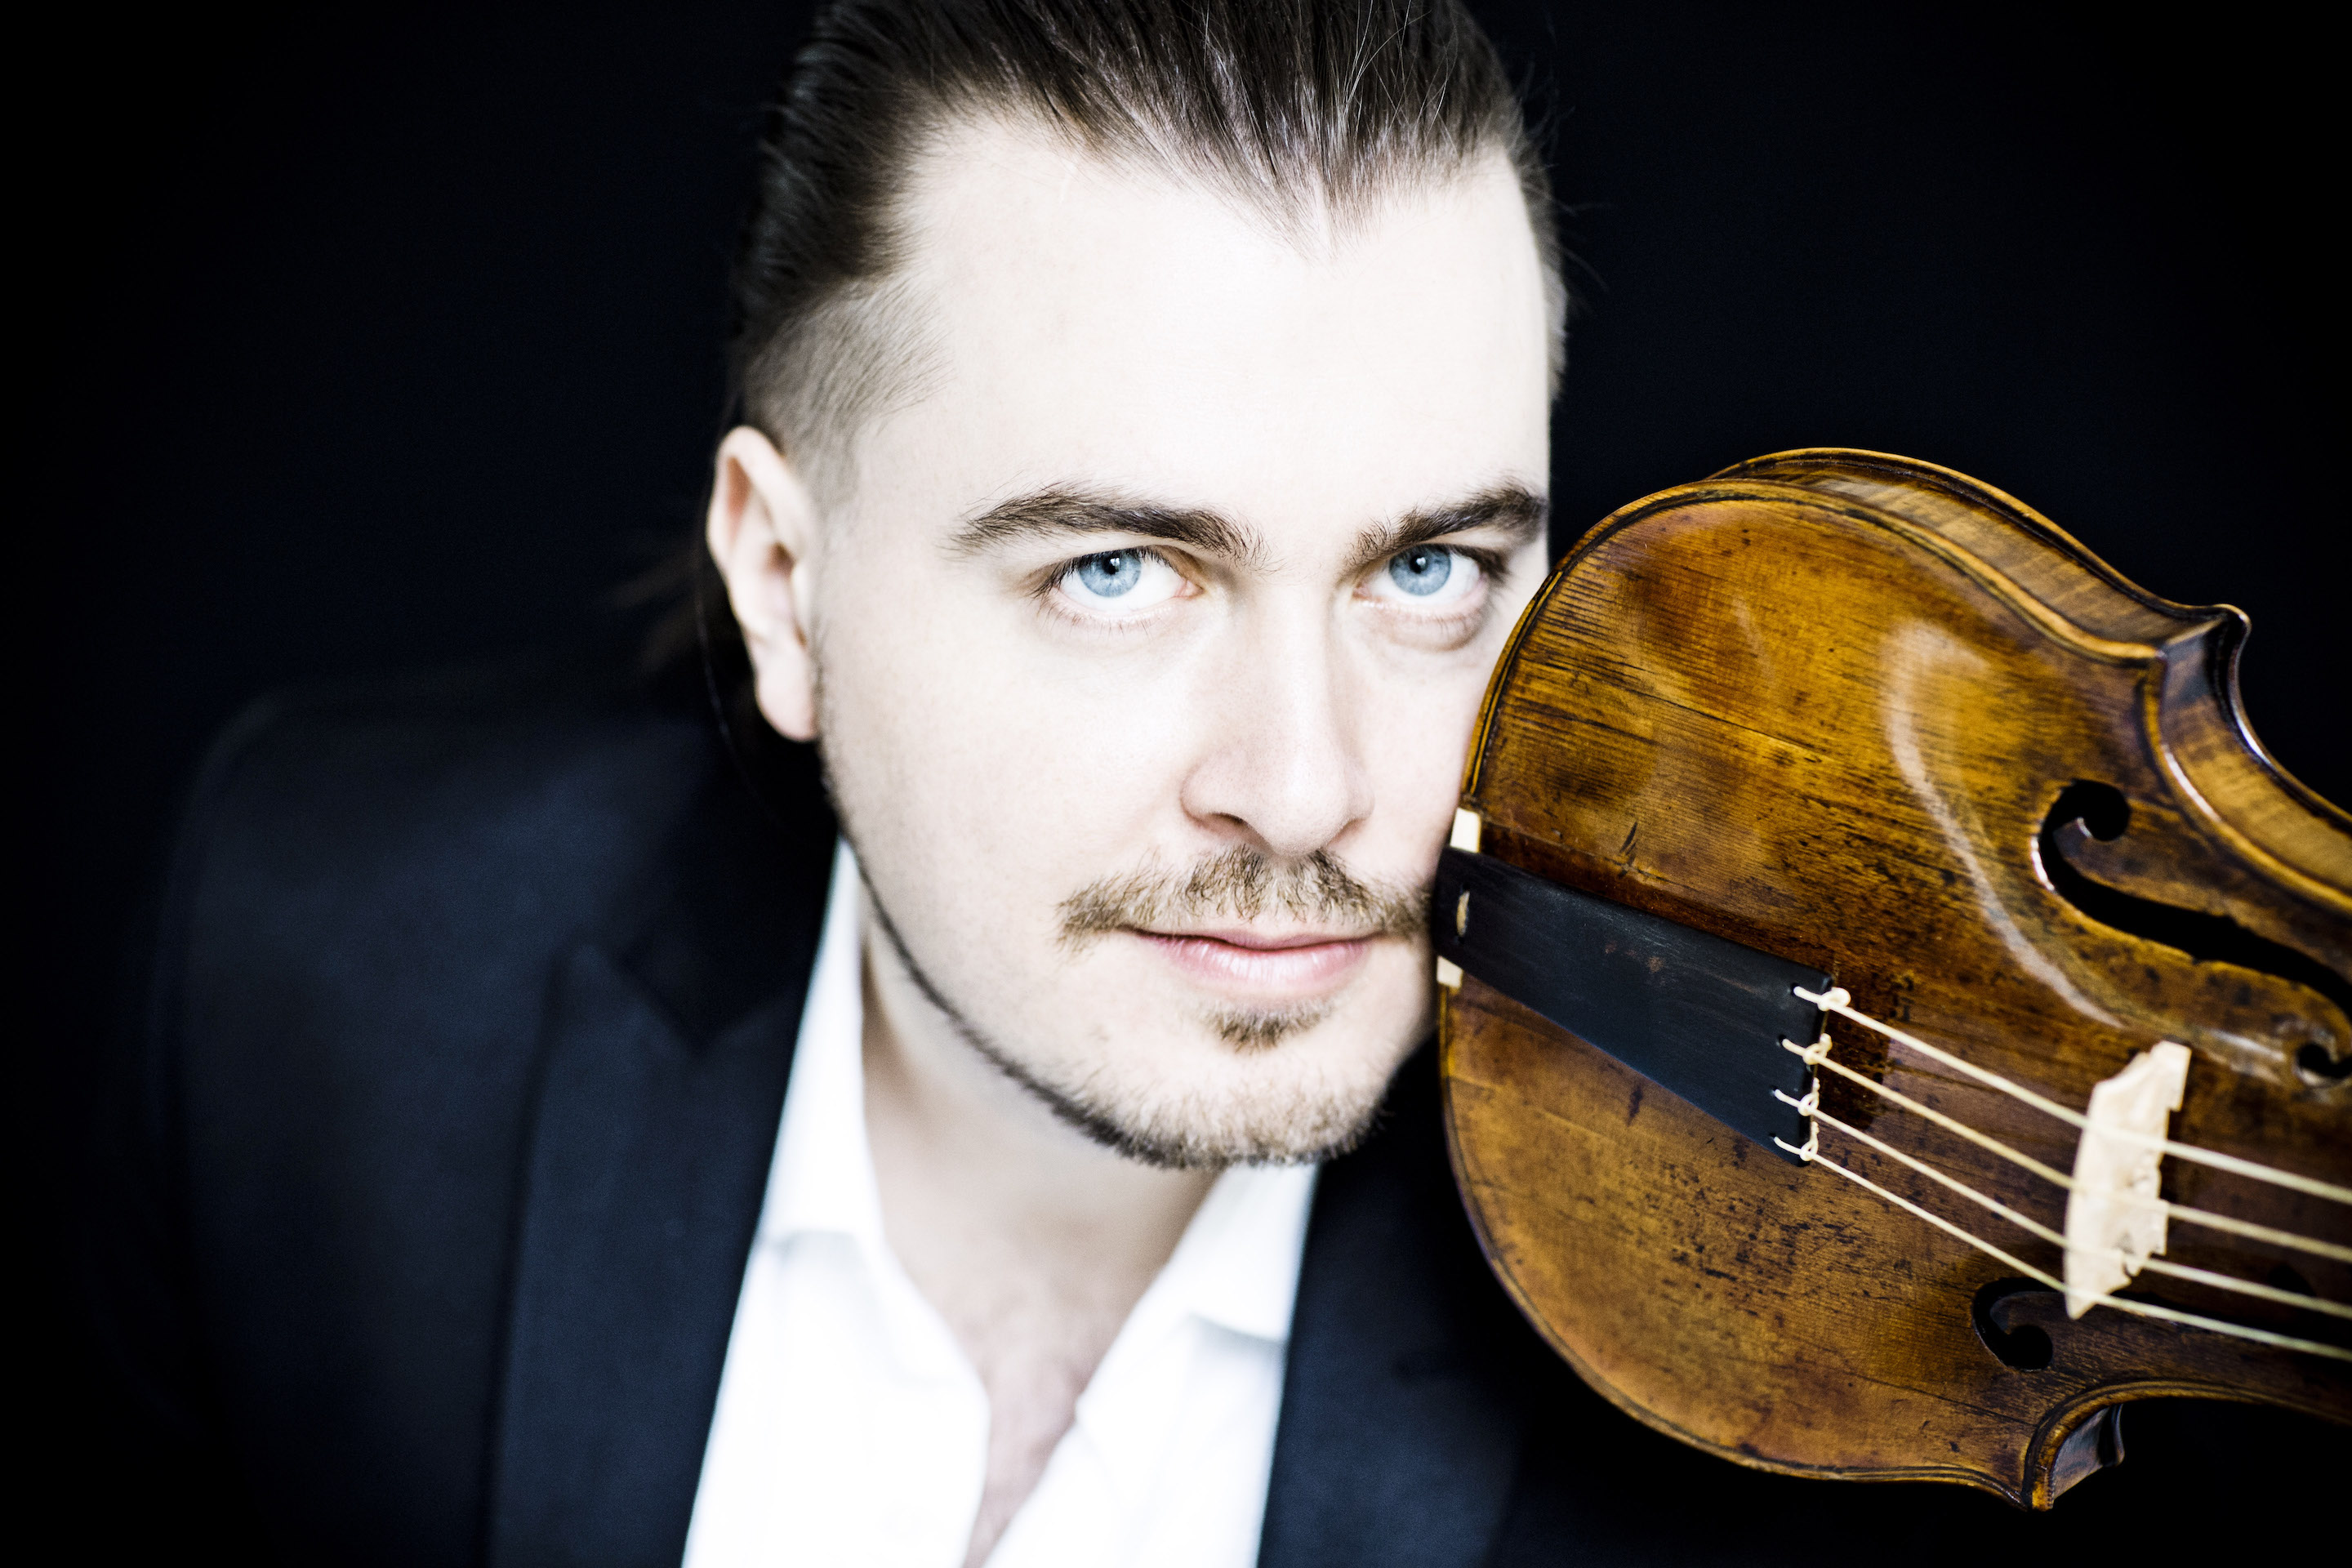 We welcome Conductor, Violinist (and Countertenor!) DMITRY SINKOVSKY to ...